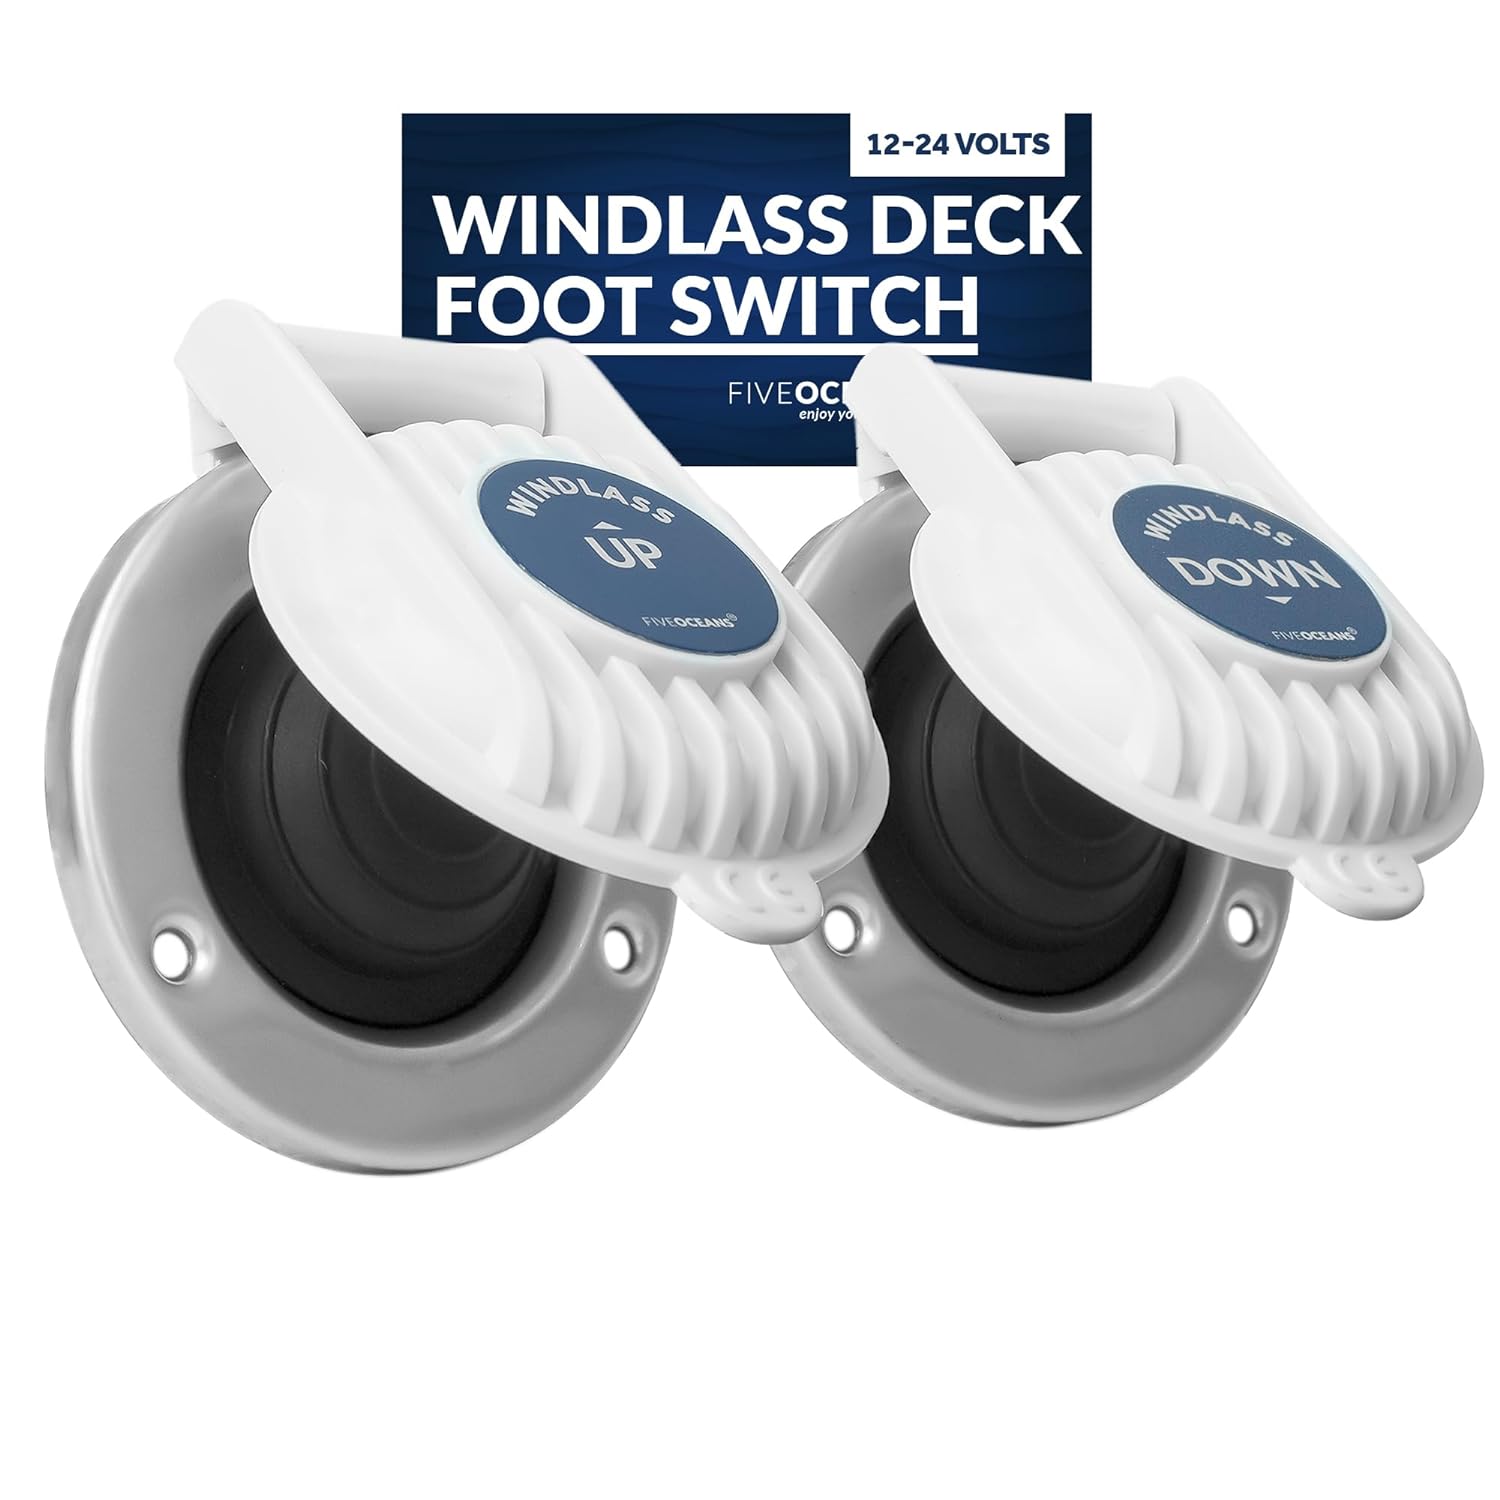 Windlass Deck Foot Switch, Up/Down Single Direction Switches - Five Oceans